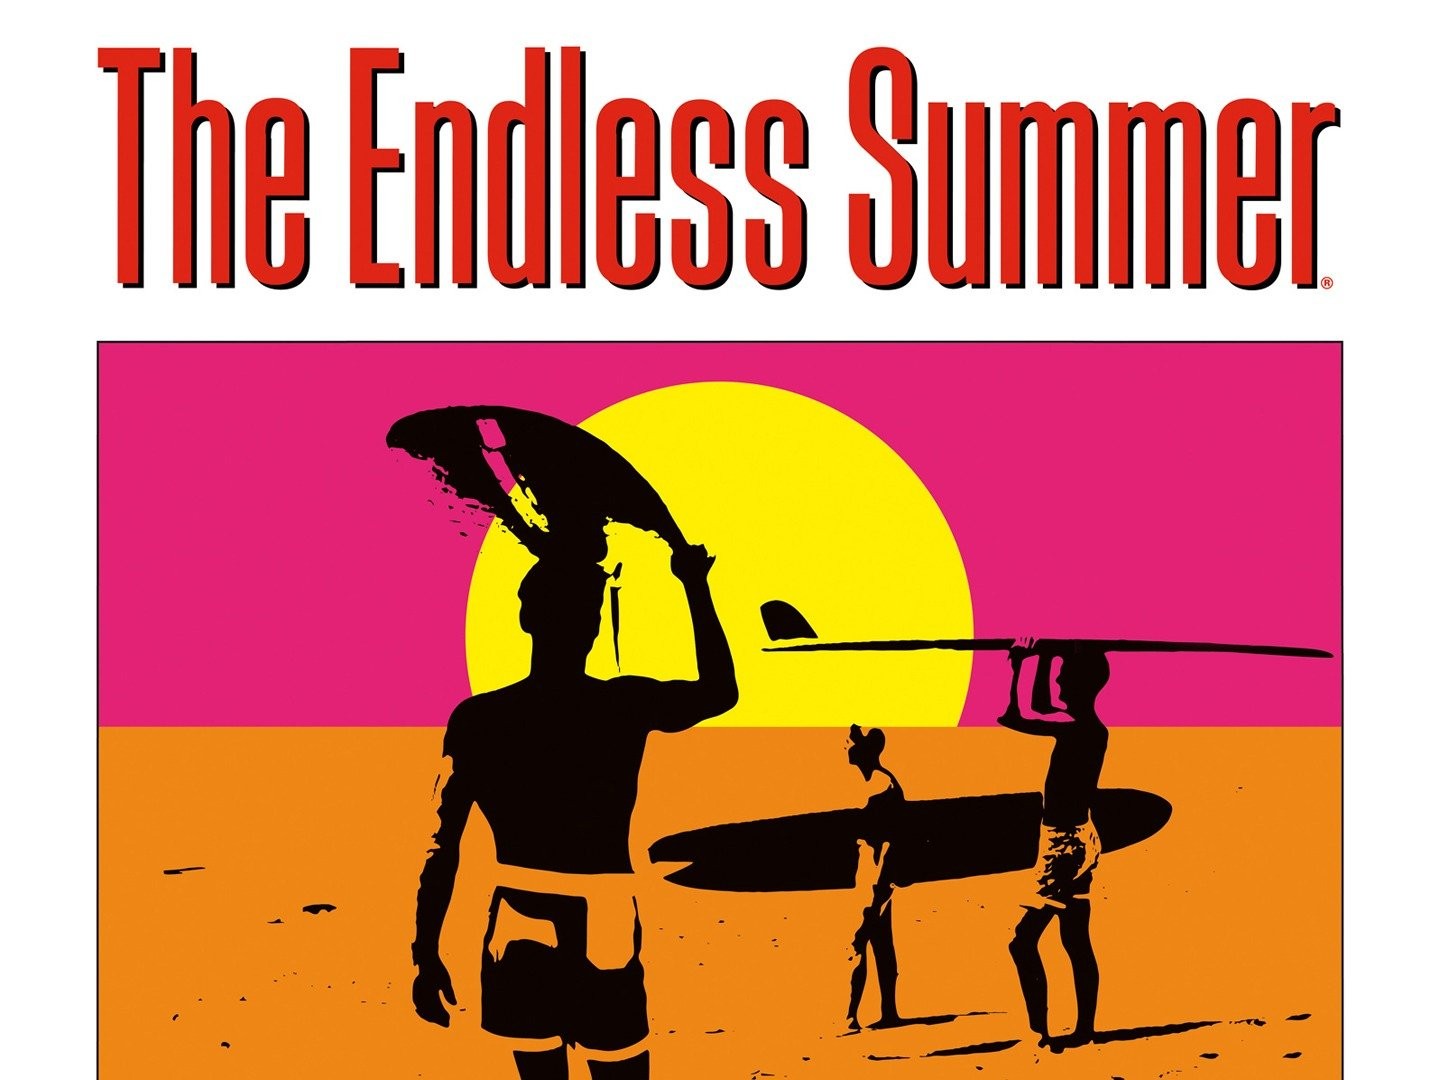 MeUndies - Endless Summer is now available to everyone